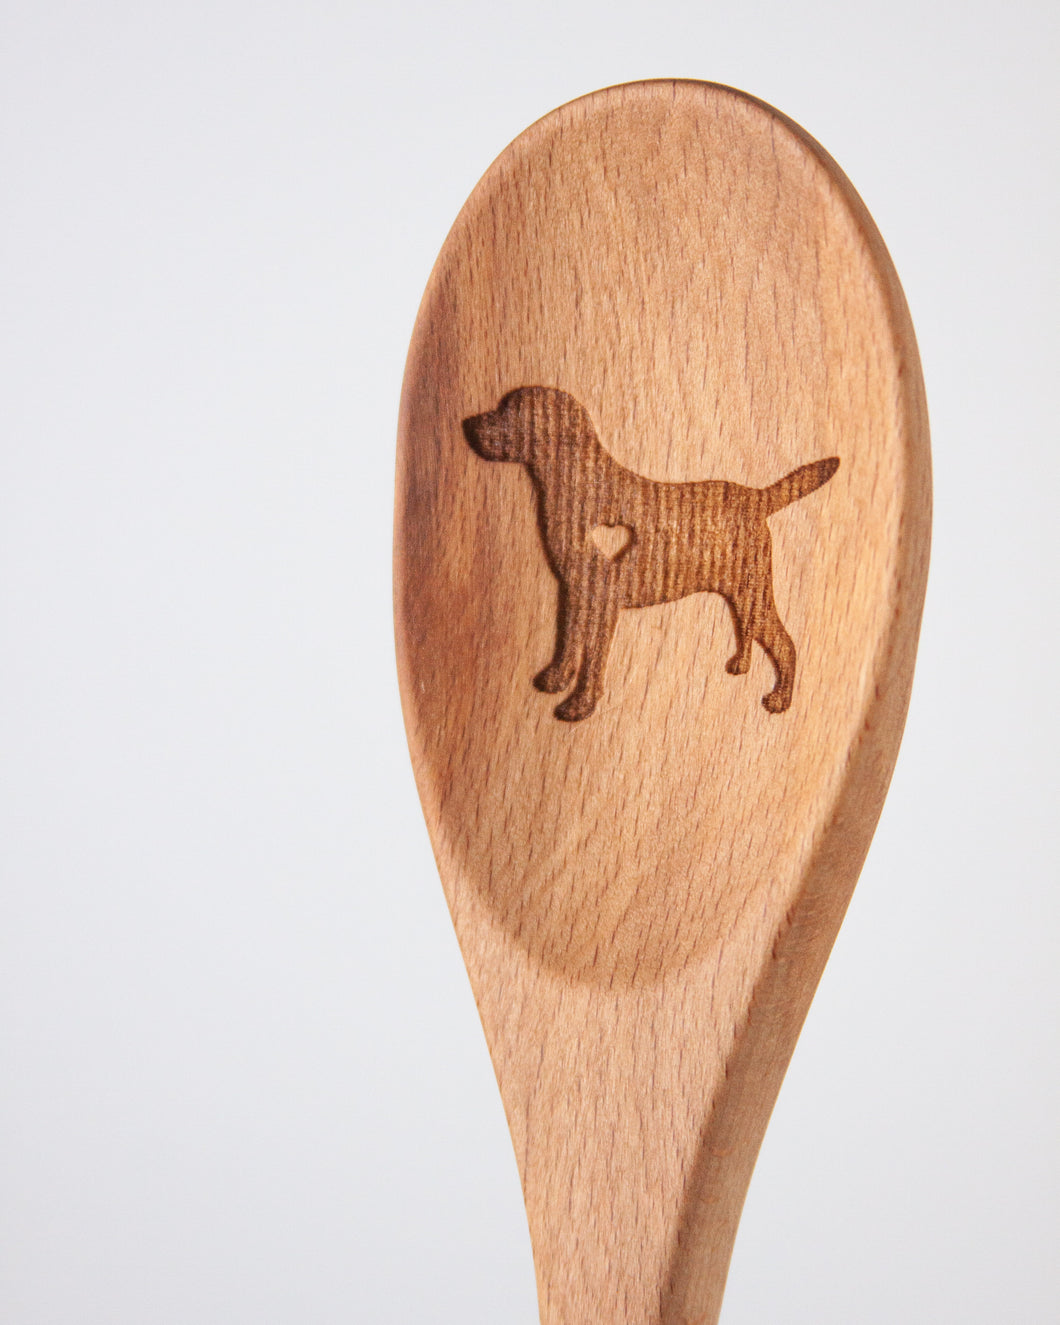 Engraved Wood Cooking + Mixing Spoon (Breed Shape)